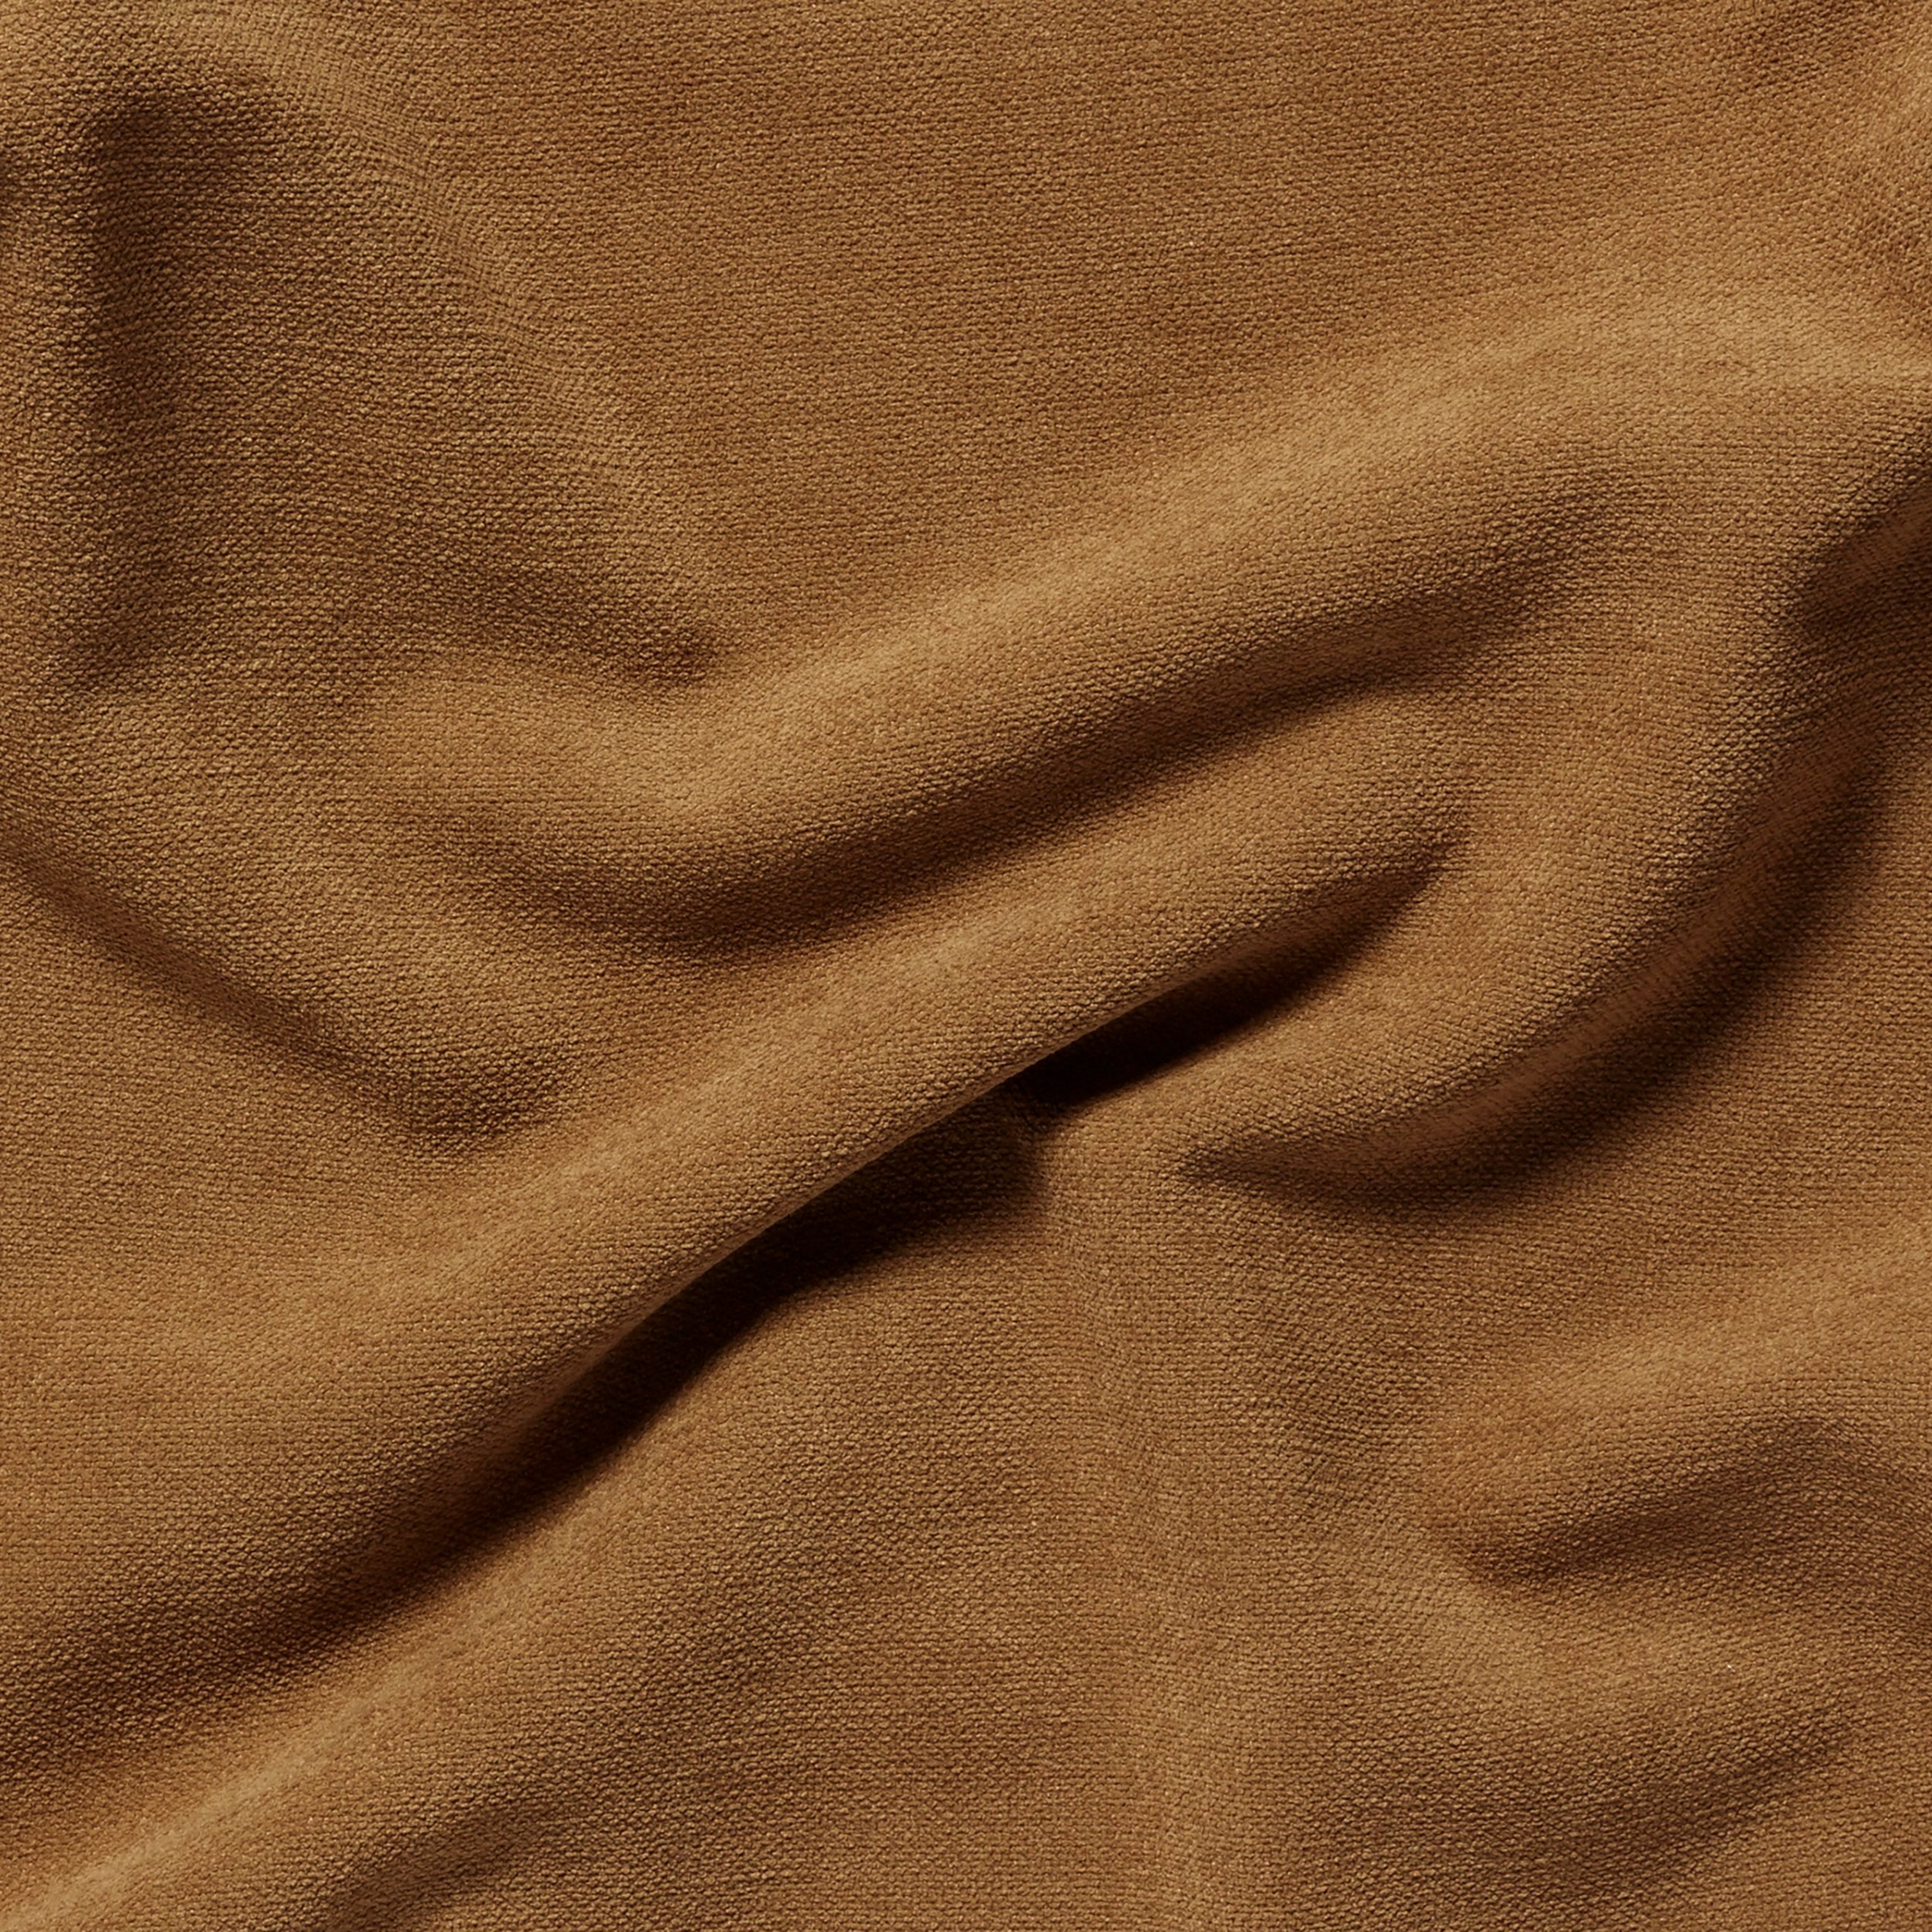 Material/color swatch of Frisco 2057 camel